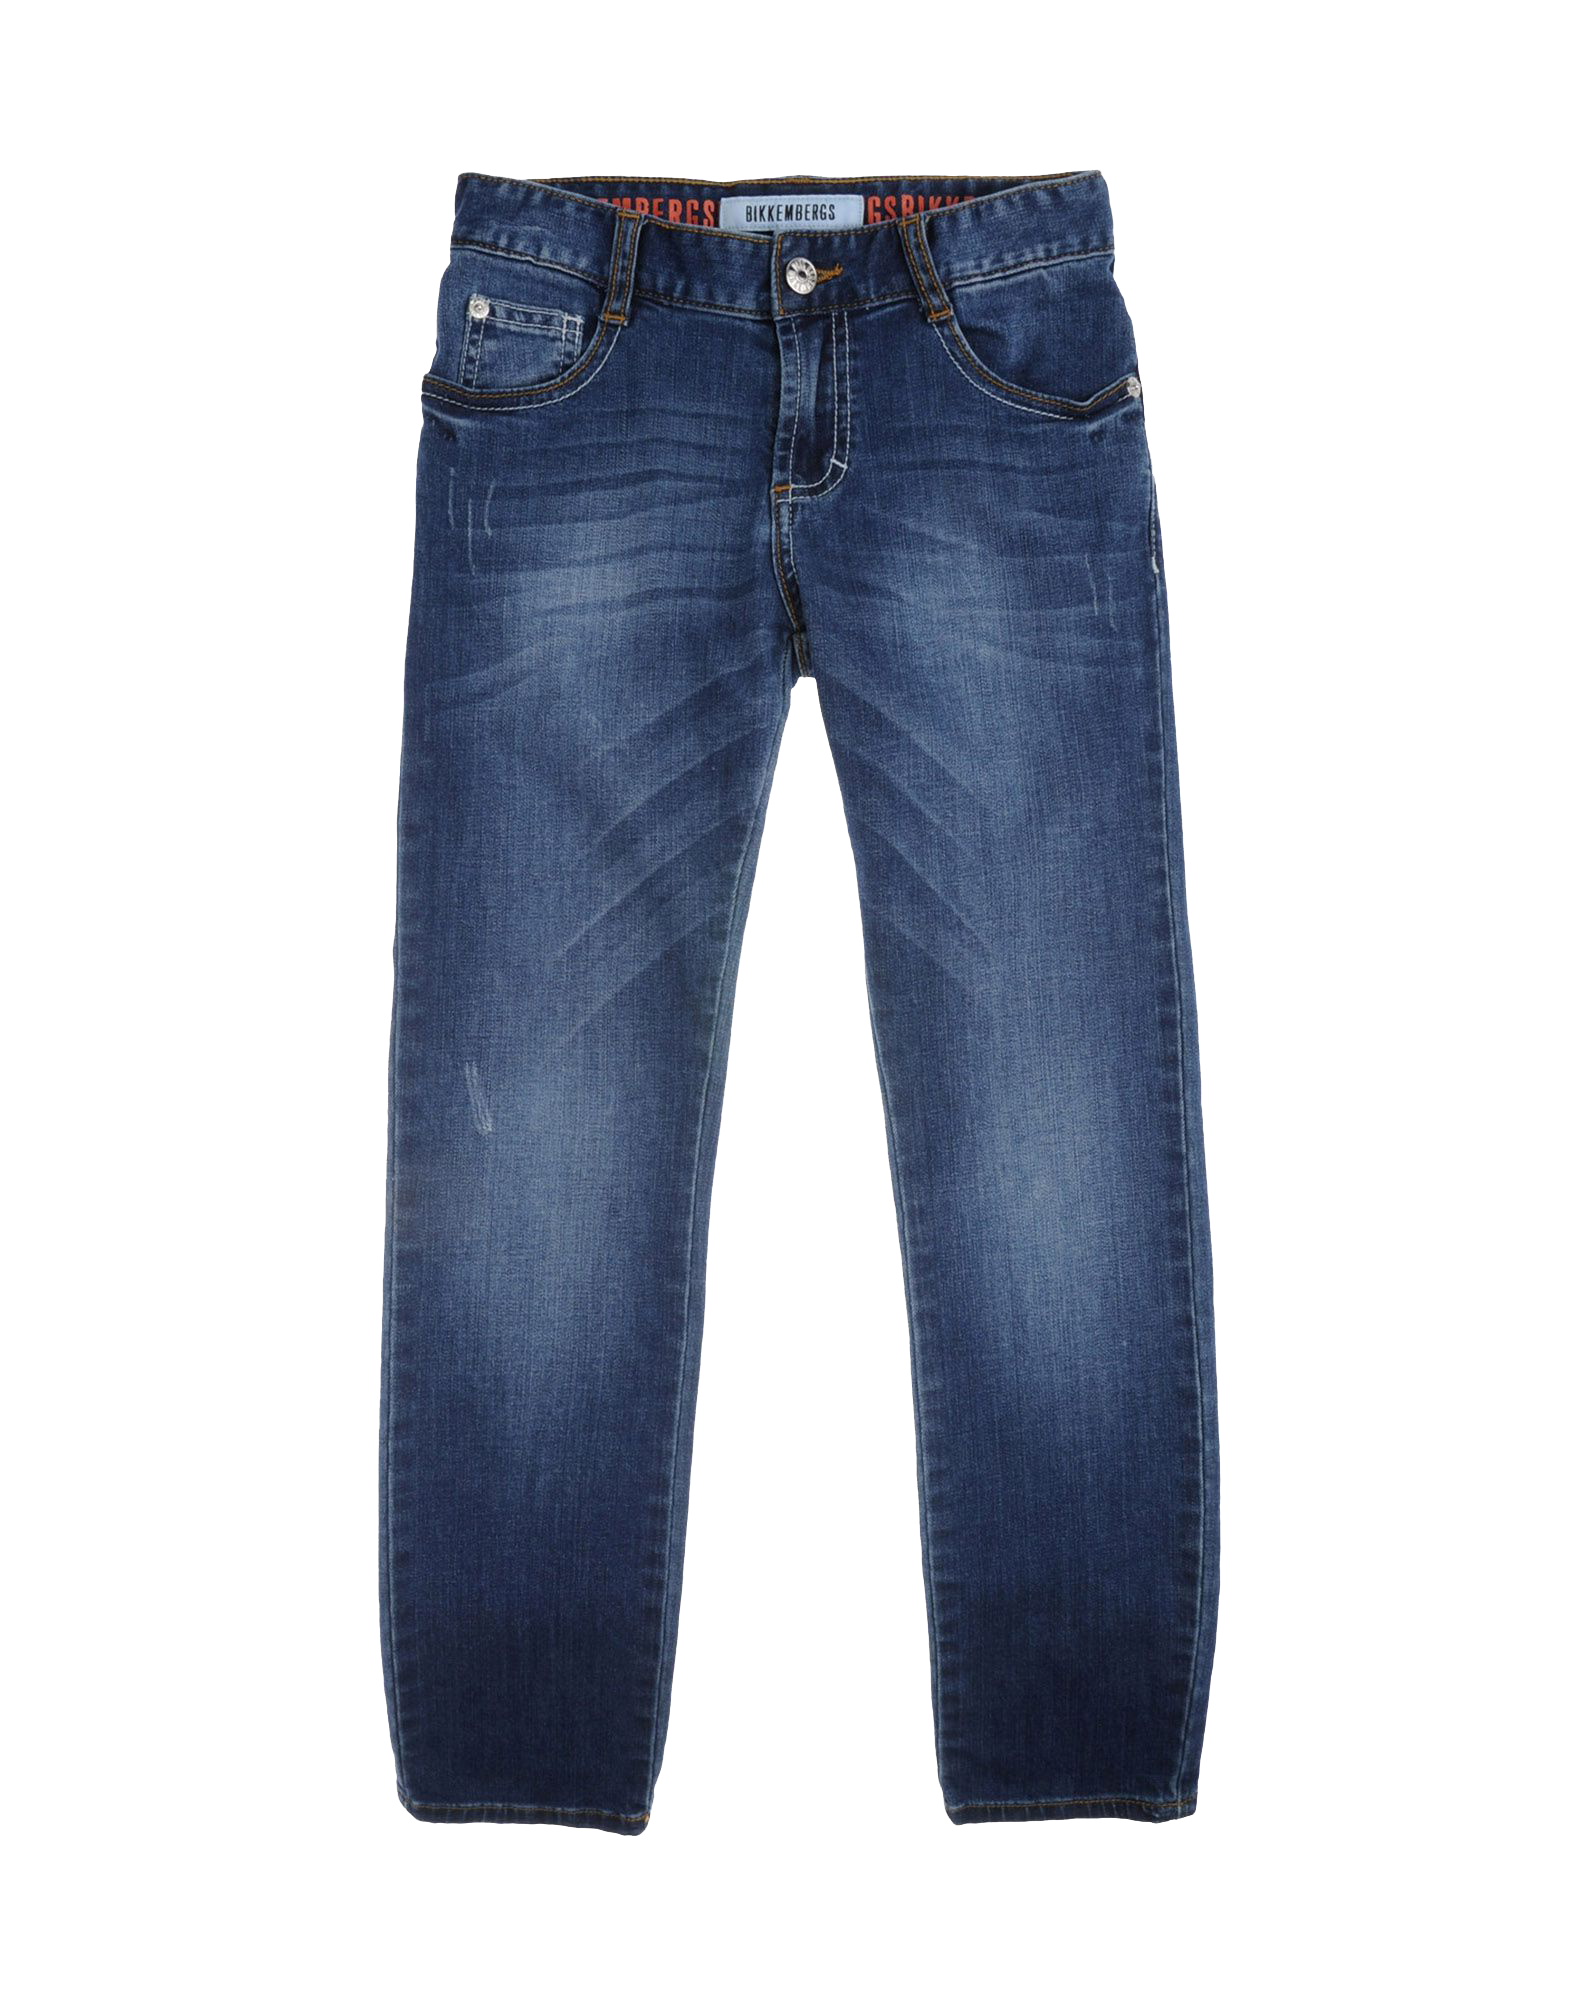 Free Jeans Png Transparent Images Download Free Jeans Png Transparent Images Png Images Free Cliparts On Clipart Library